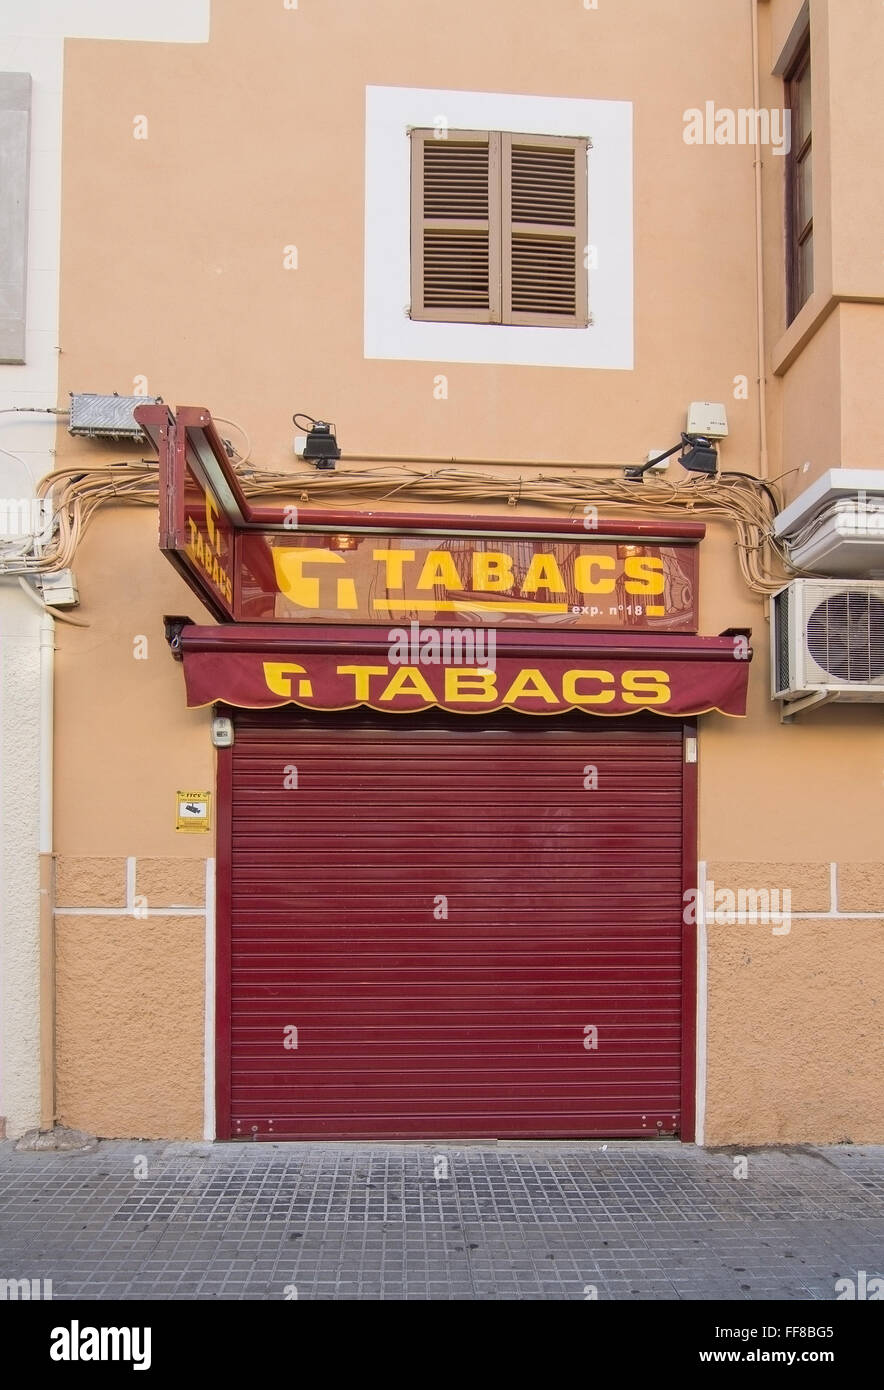 Tabacco store closed for the weekend with red cover on December 19, 2015 in Palma de Mallorca, Balearic islands, Spain Stock Photo